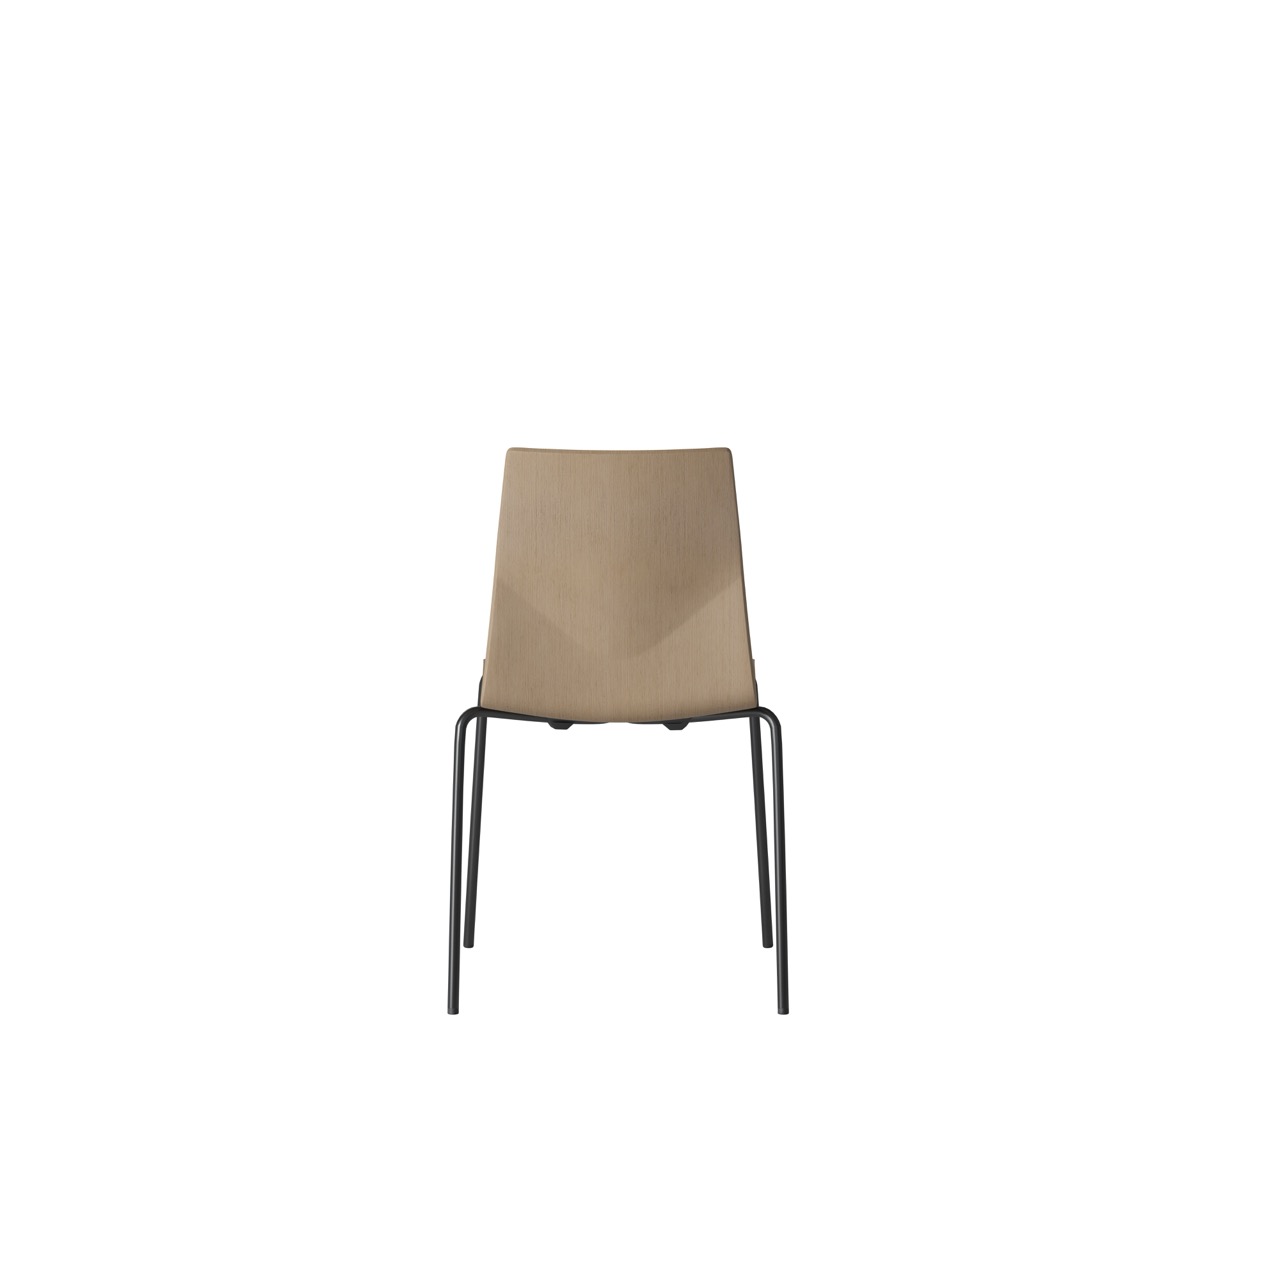 OCEE&FOUR – Chairs – FourCast 2 Four – Veneer shell - Packshot Image 3 Large